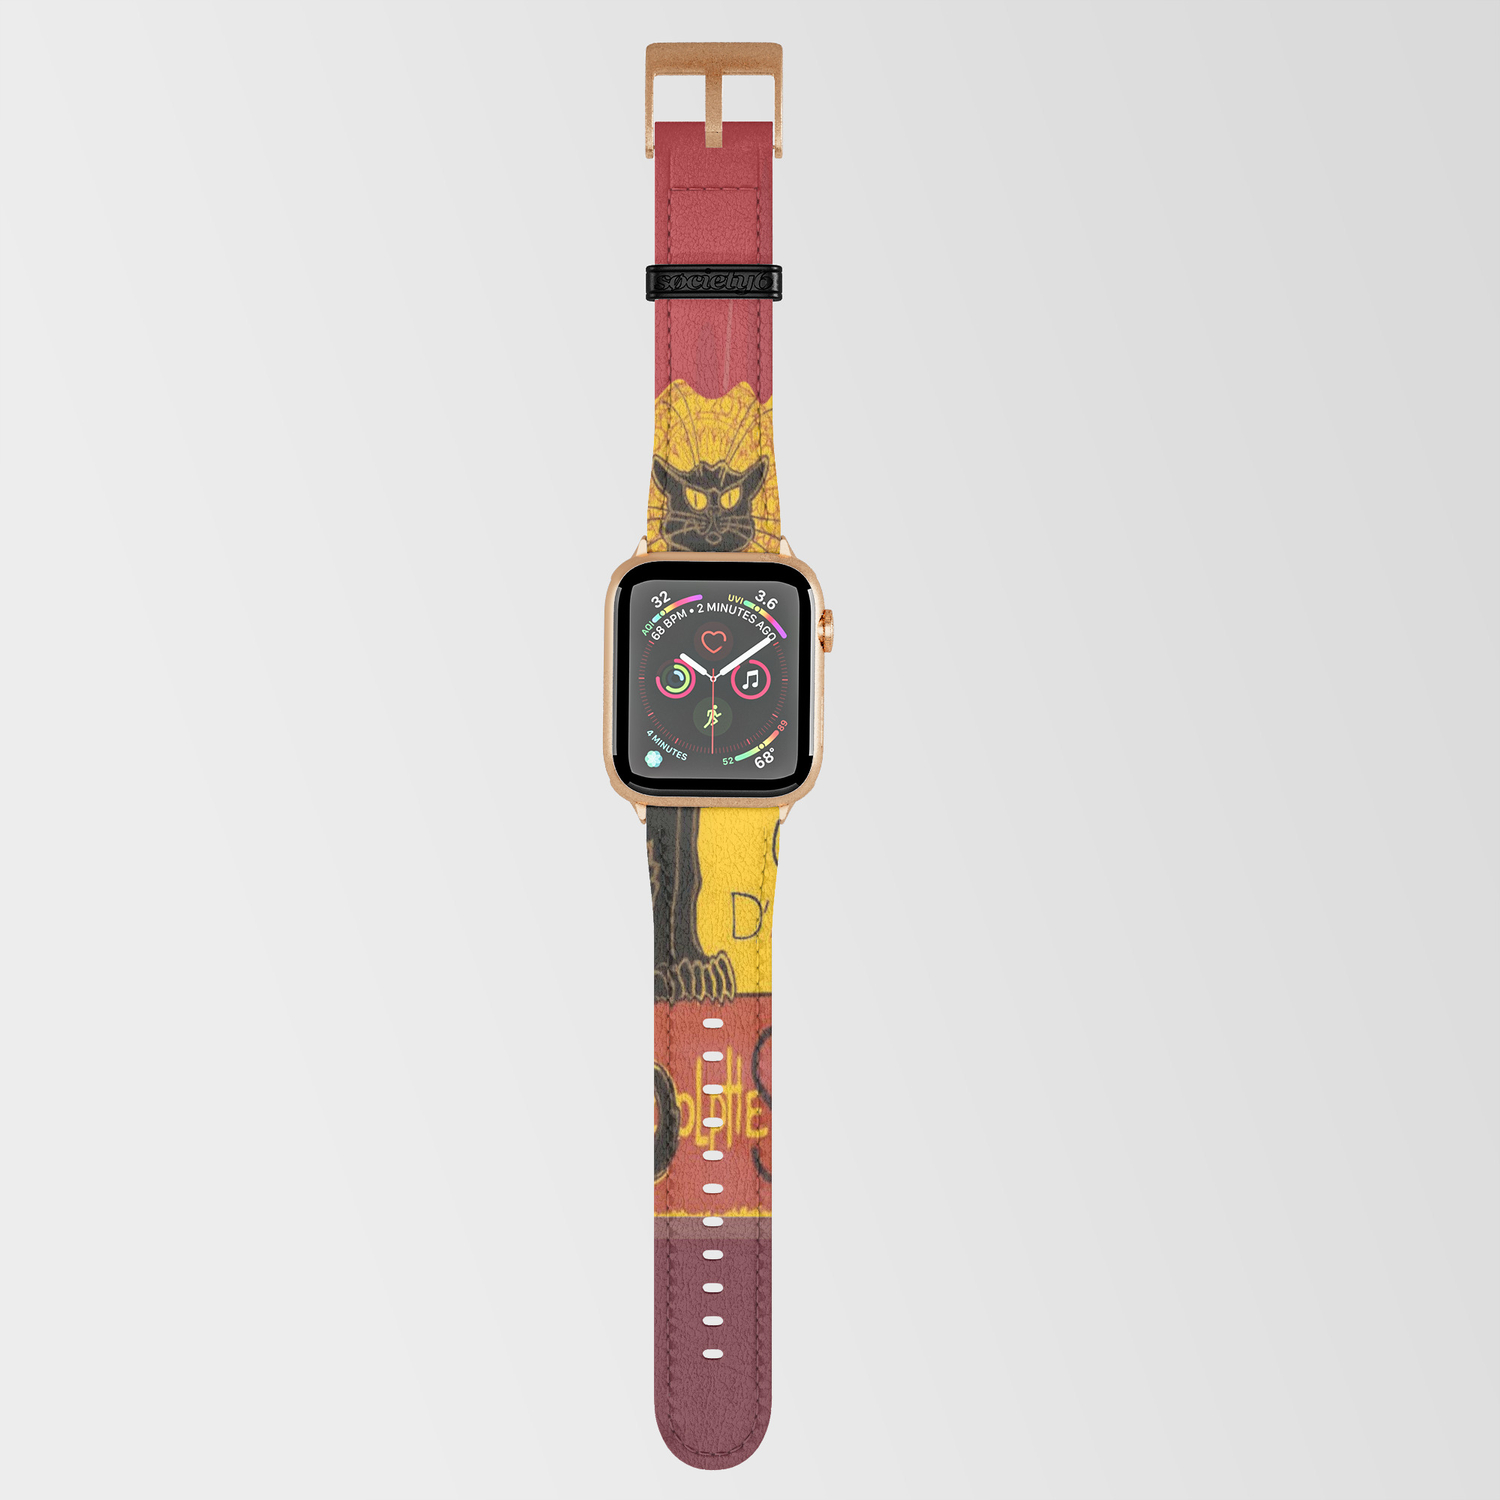 Le Chat Noir DAmour Theatre Stage Apple Band by taiche | Society6